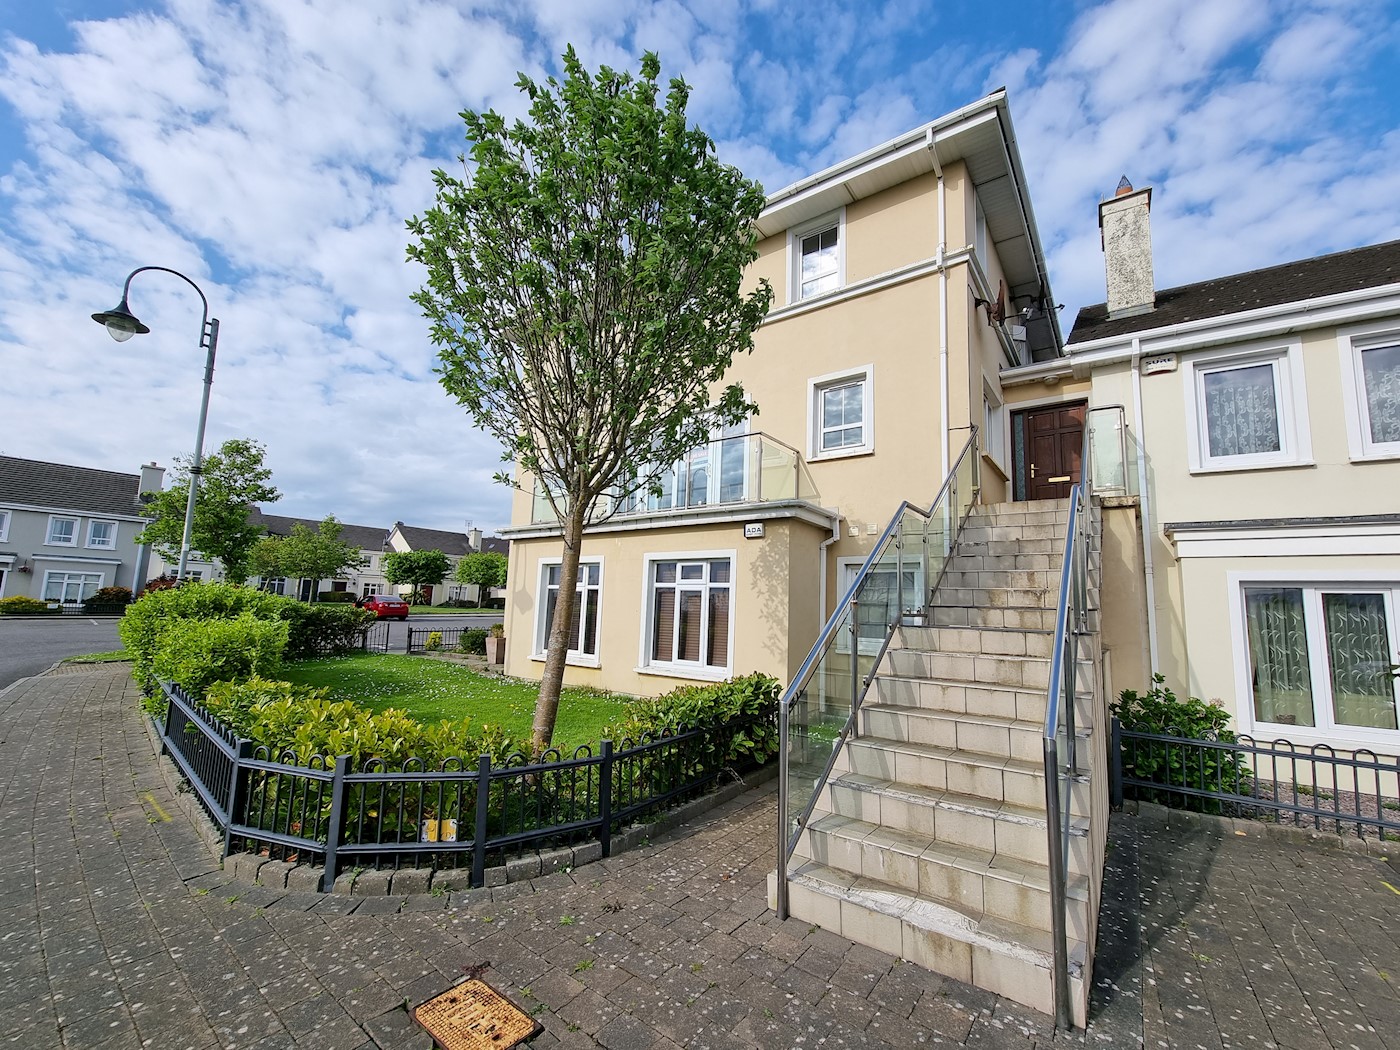 Apartment 23, Cuil Fuine, Lisloose, Tralee, Co. Kerry, V92 FD23 1/22